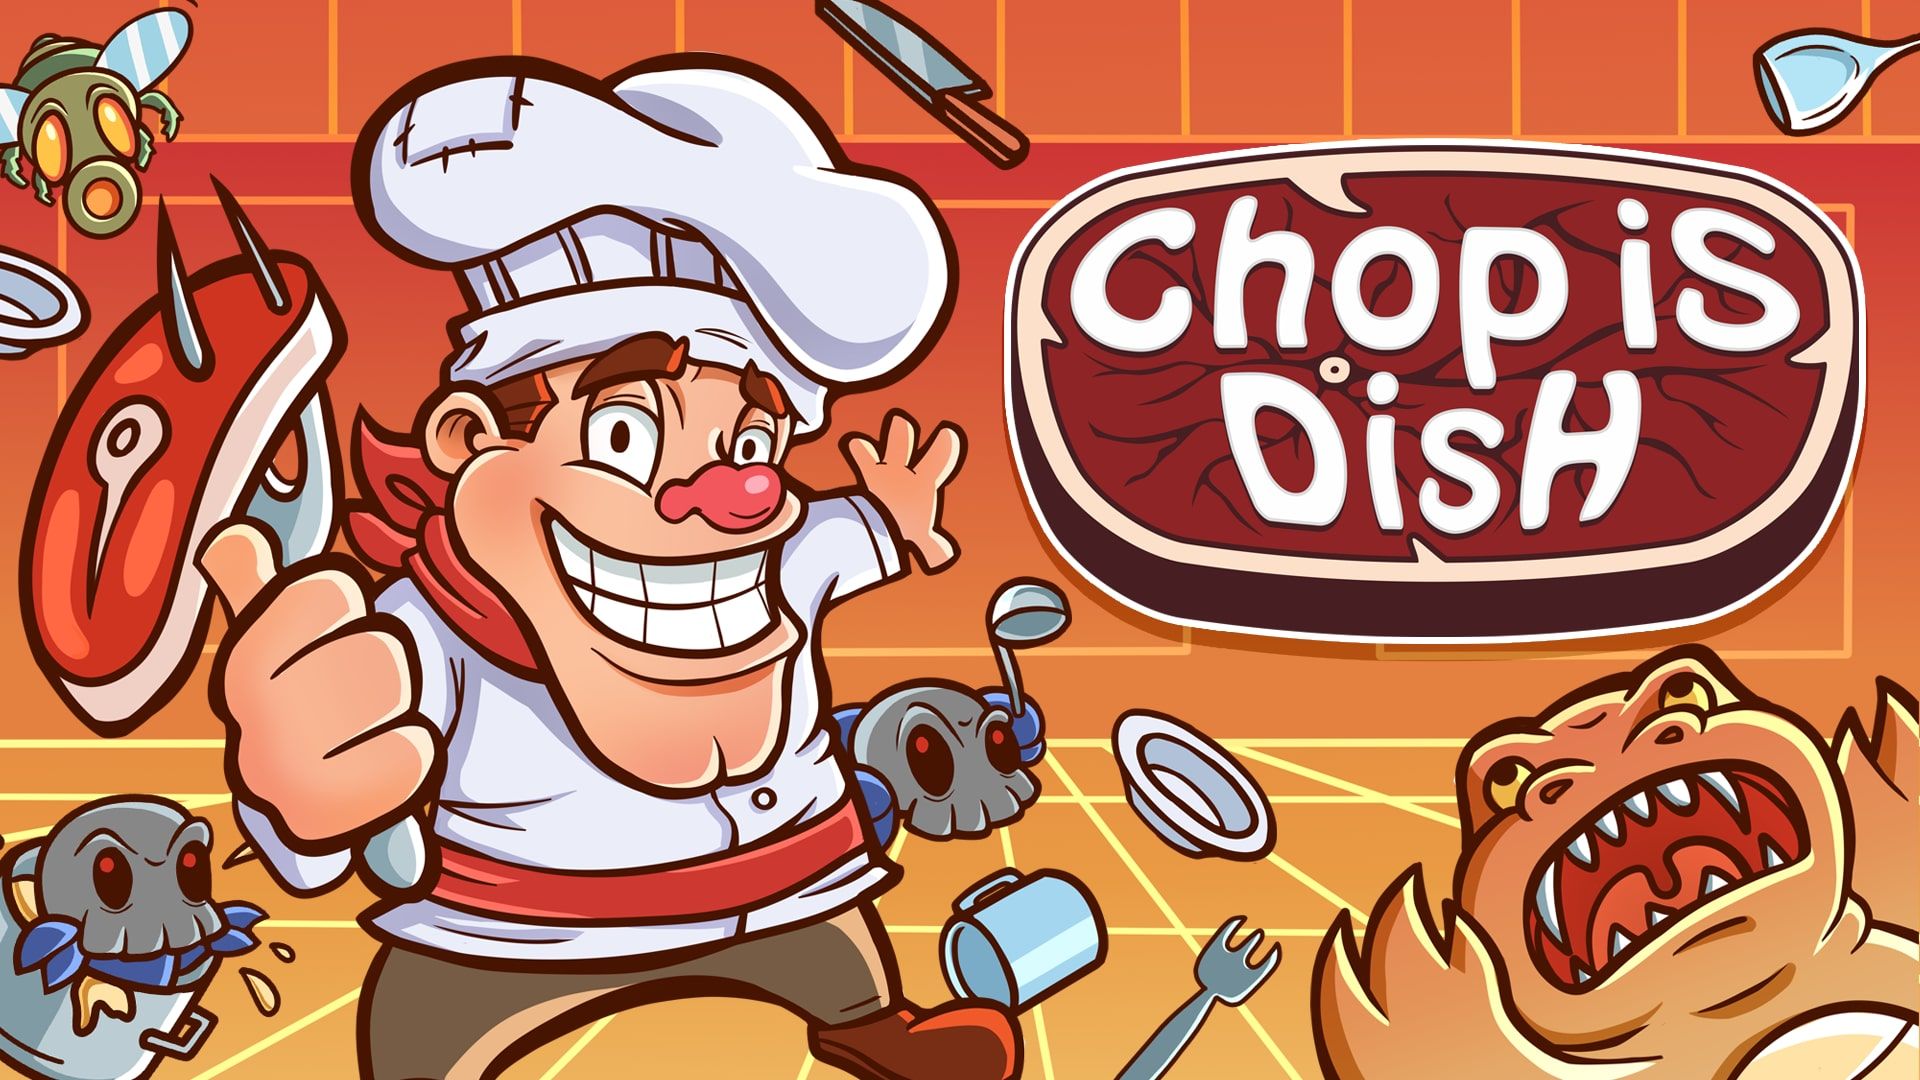 Chop is Dish cover image